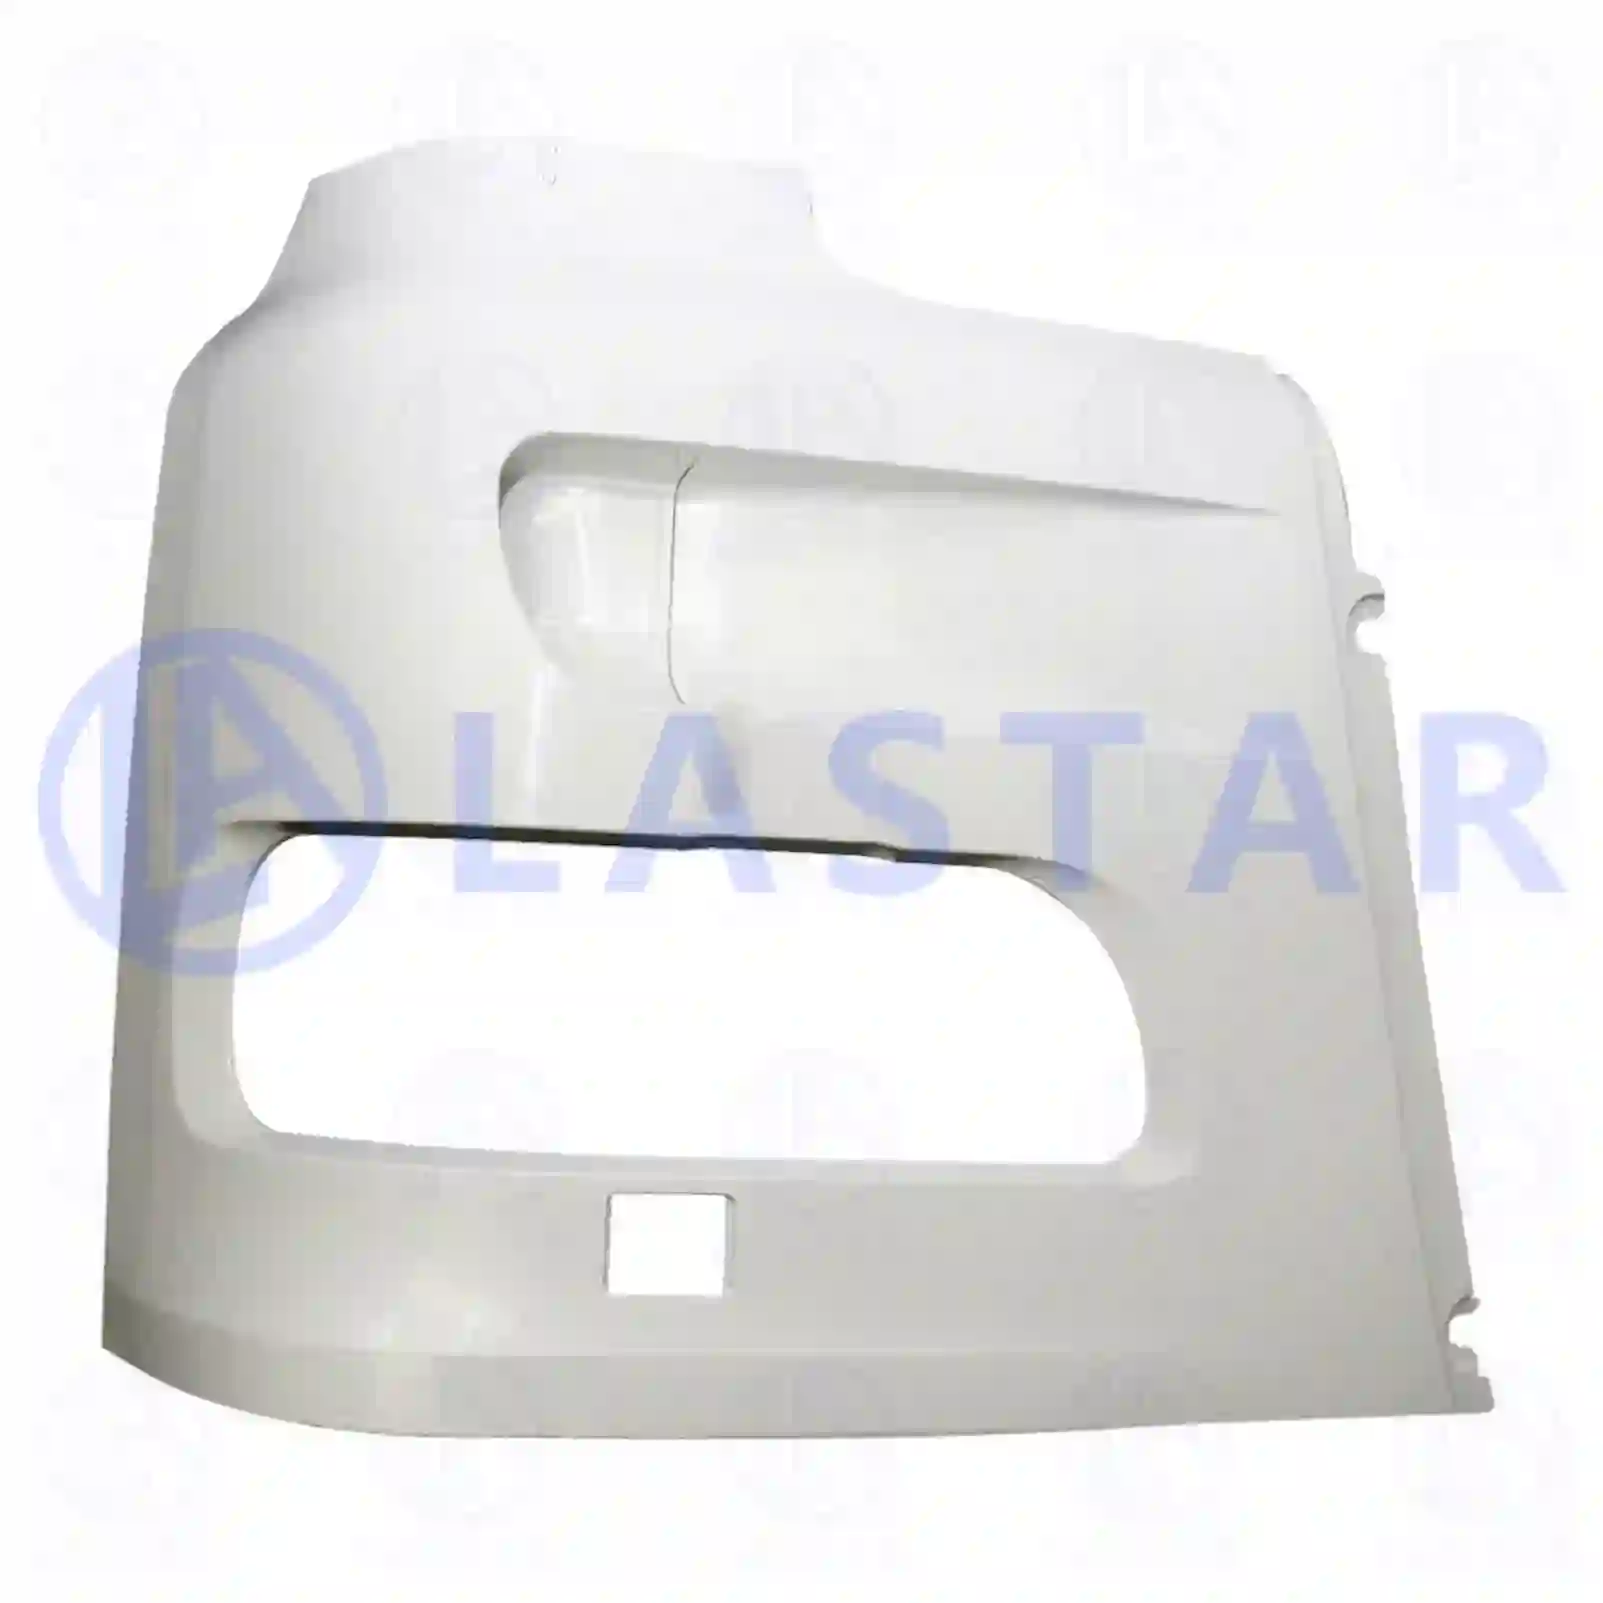 Lamp cover, right, 77712328, 1398264, 1398285, 1738627, 1911144 ||  77712328 Lastar Spare Part | Truck Spare Parts, Auotomotive Spare Parts Lamp cover, right, 77712328, 1398264, 1398285, 1738627, 1911144 ||  77712328 Lastar Spare Part | Truck Spare Parts, Auotomotive Spare Parts